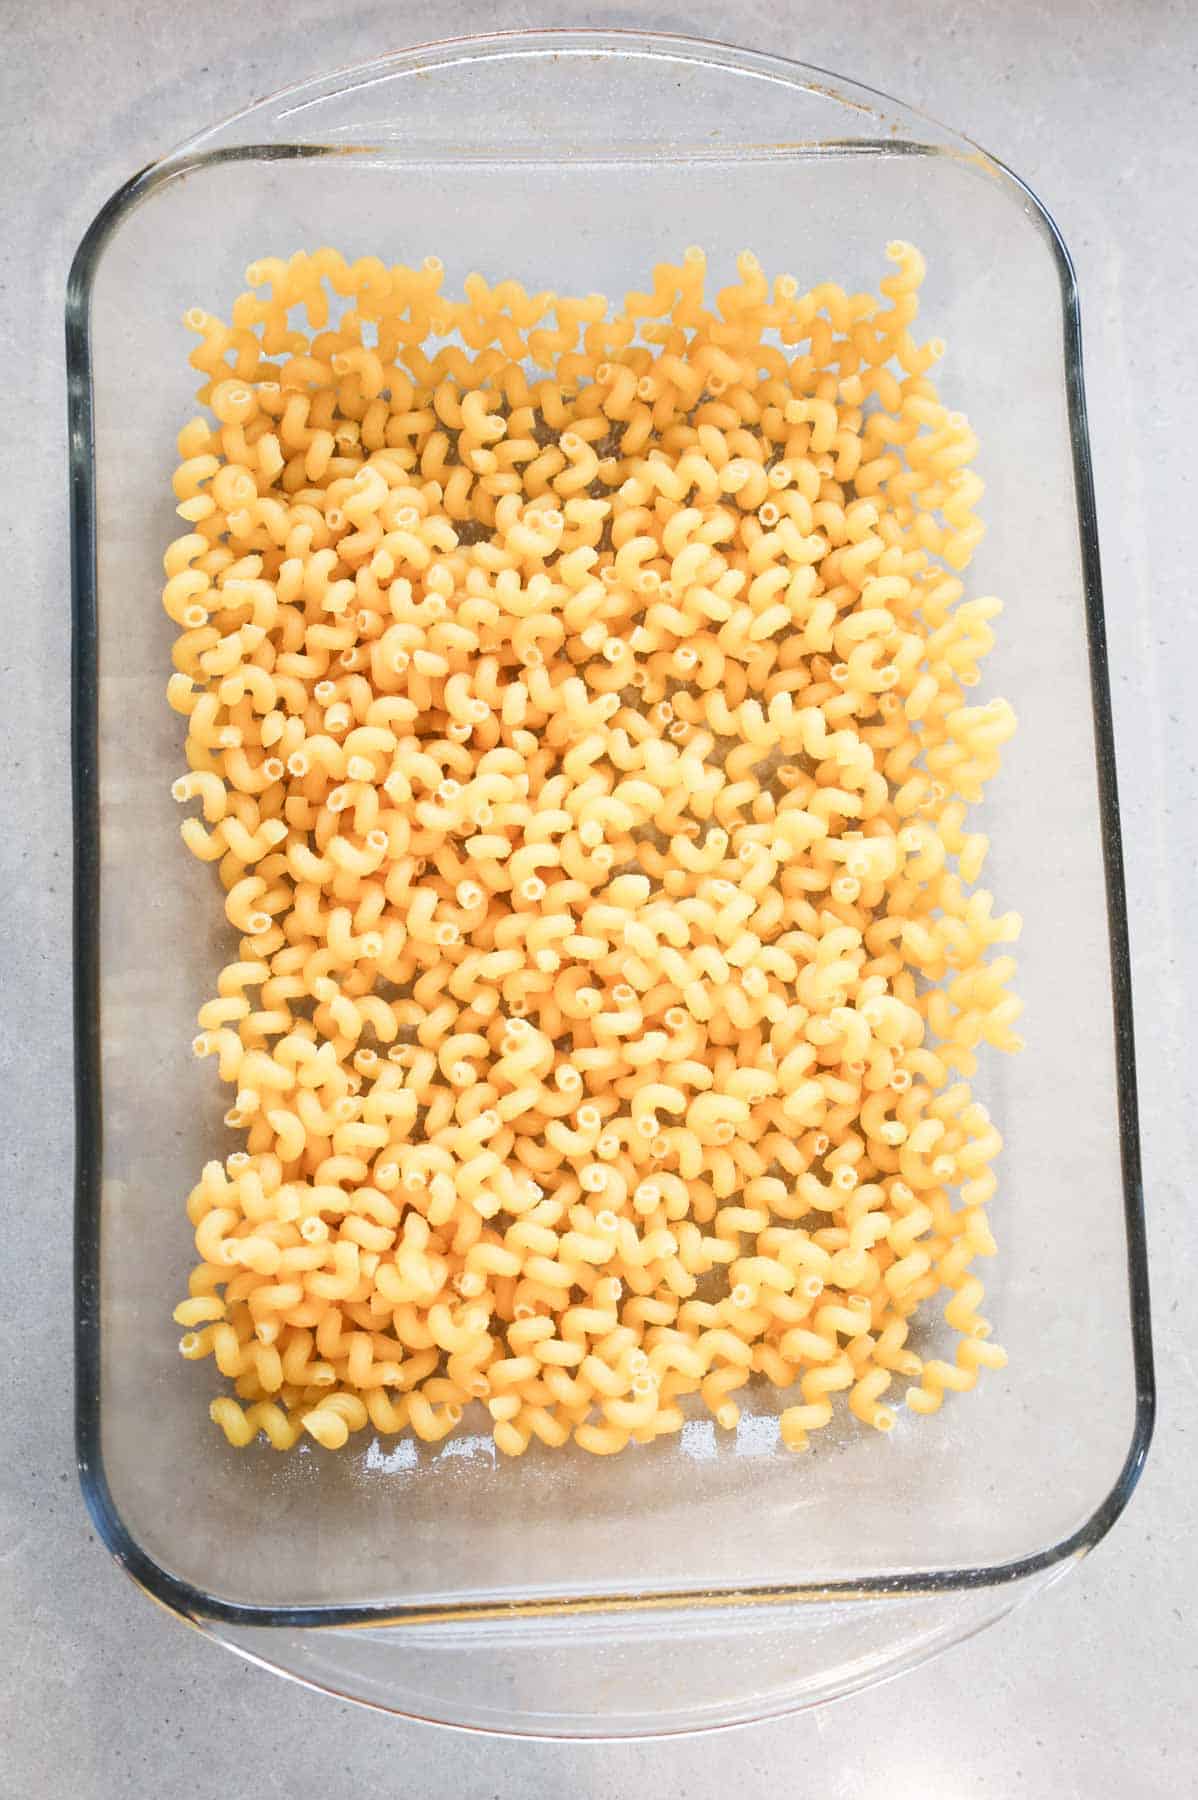 uncooked pasta noodles in a baking dish